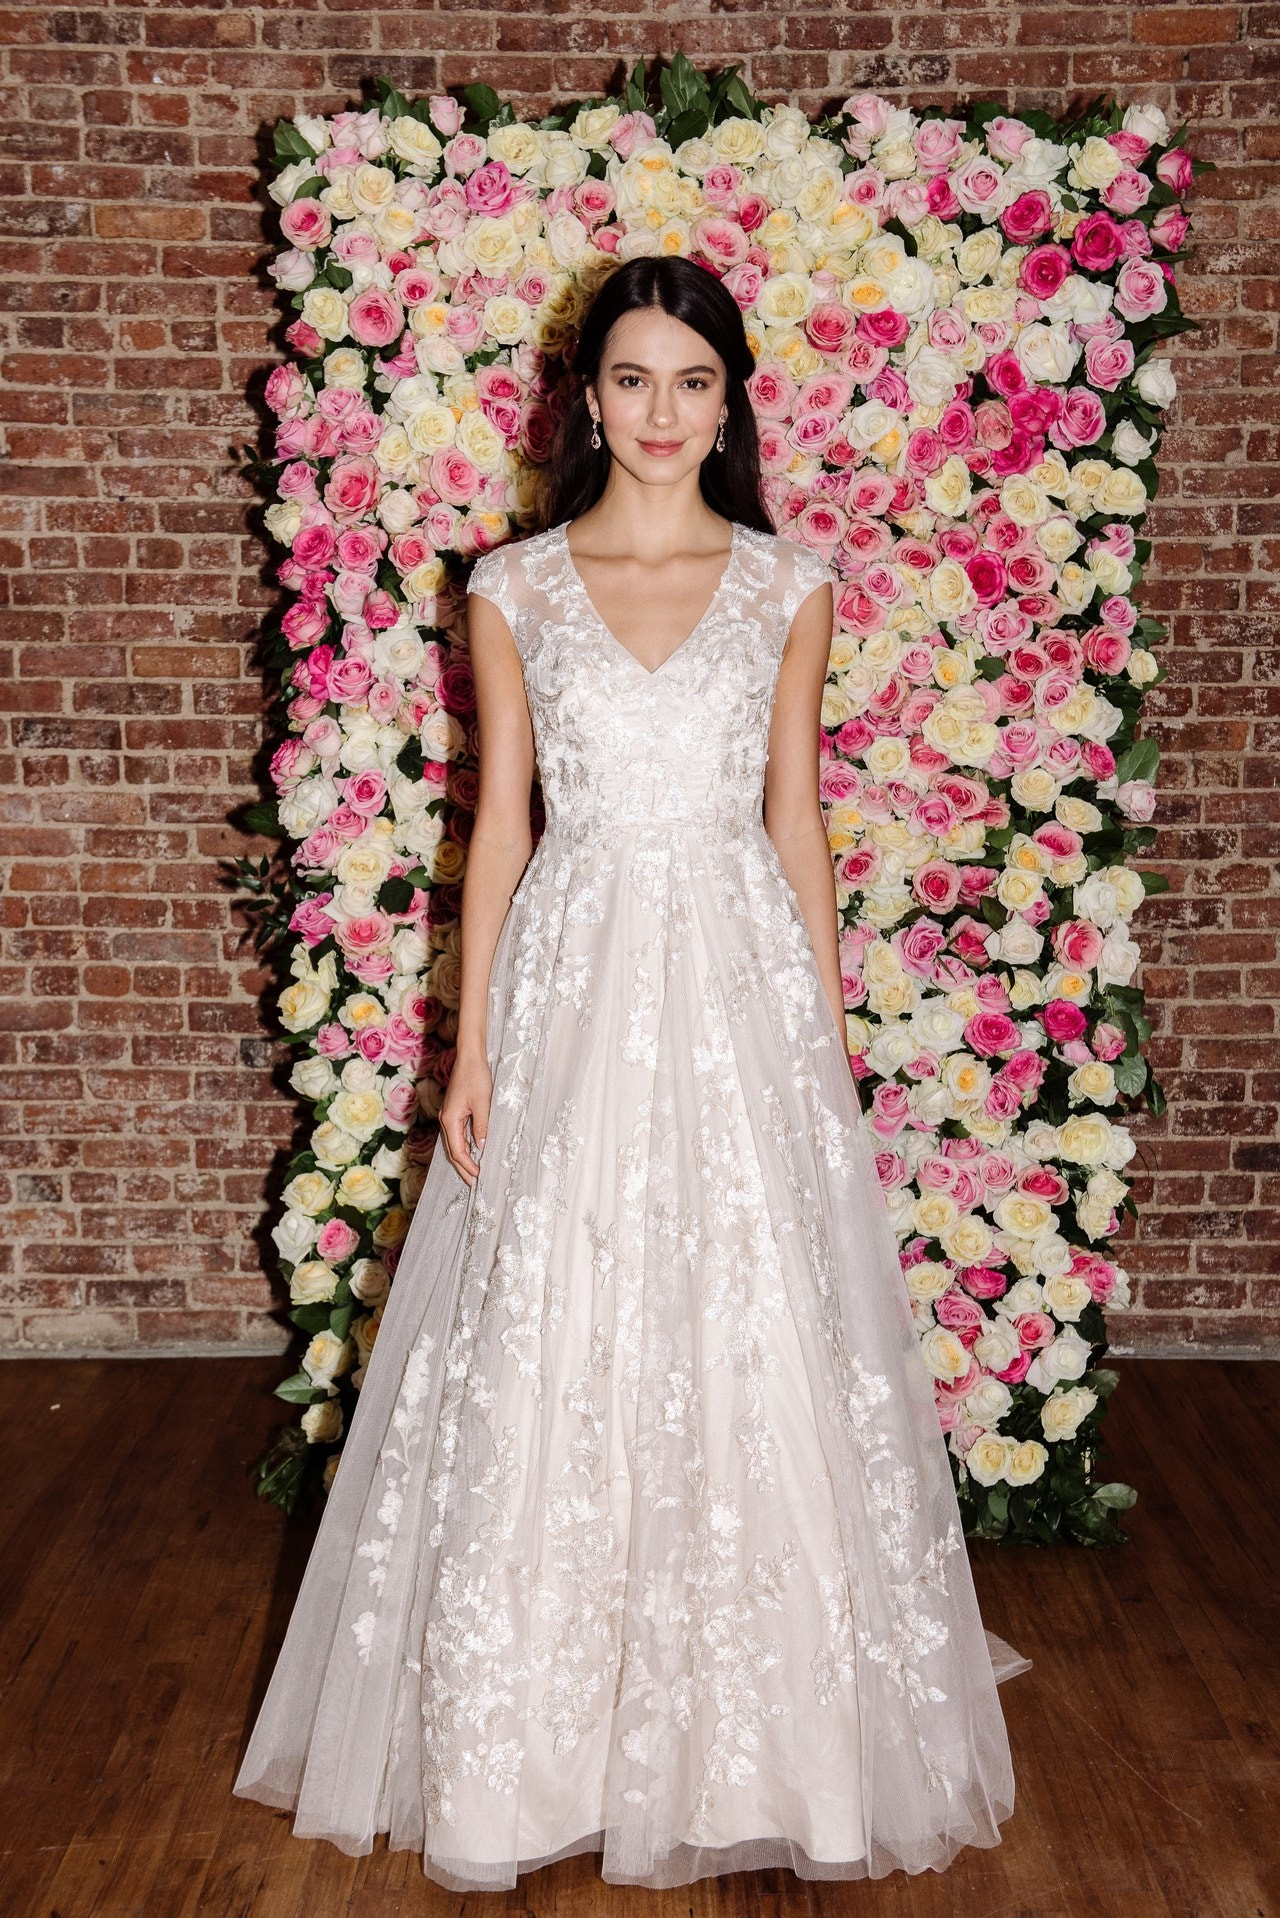 New Wedding Dresses
 Here Are the 12 Most Drop Dead Gorgeous Wedding Dresses